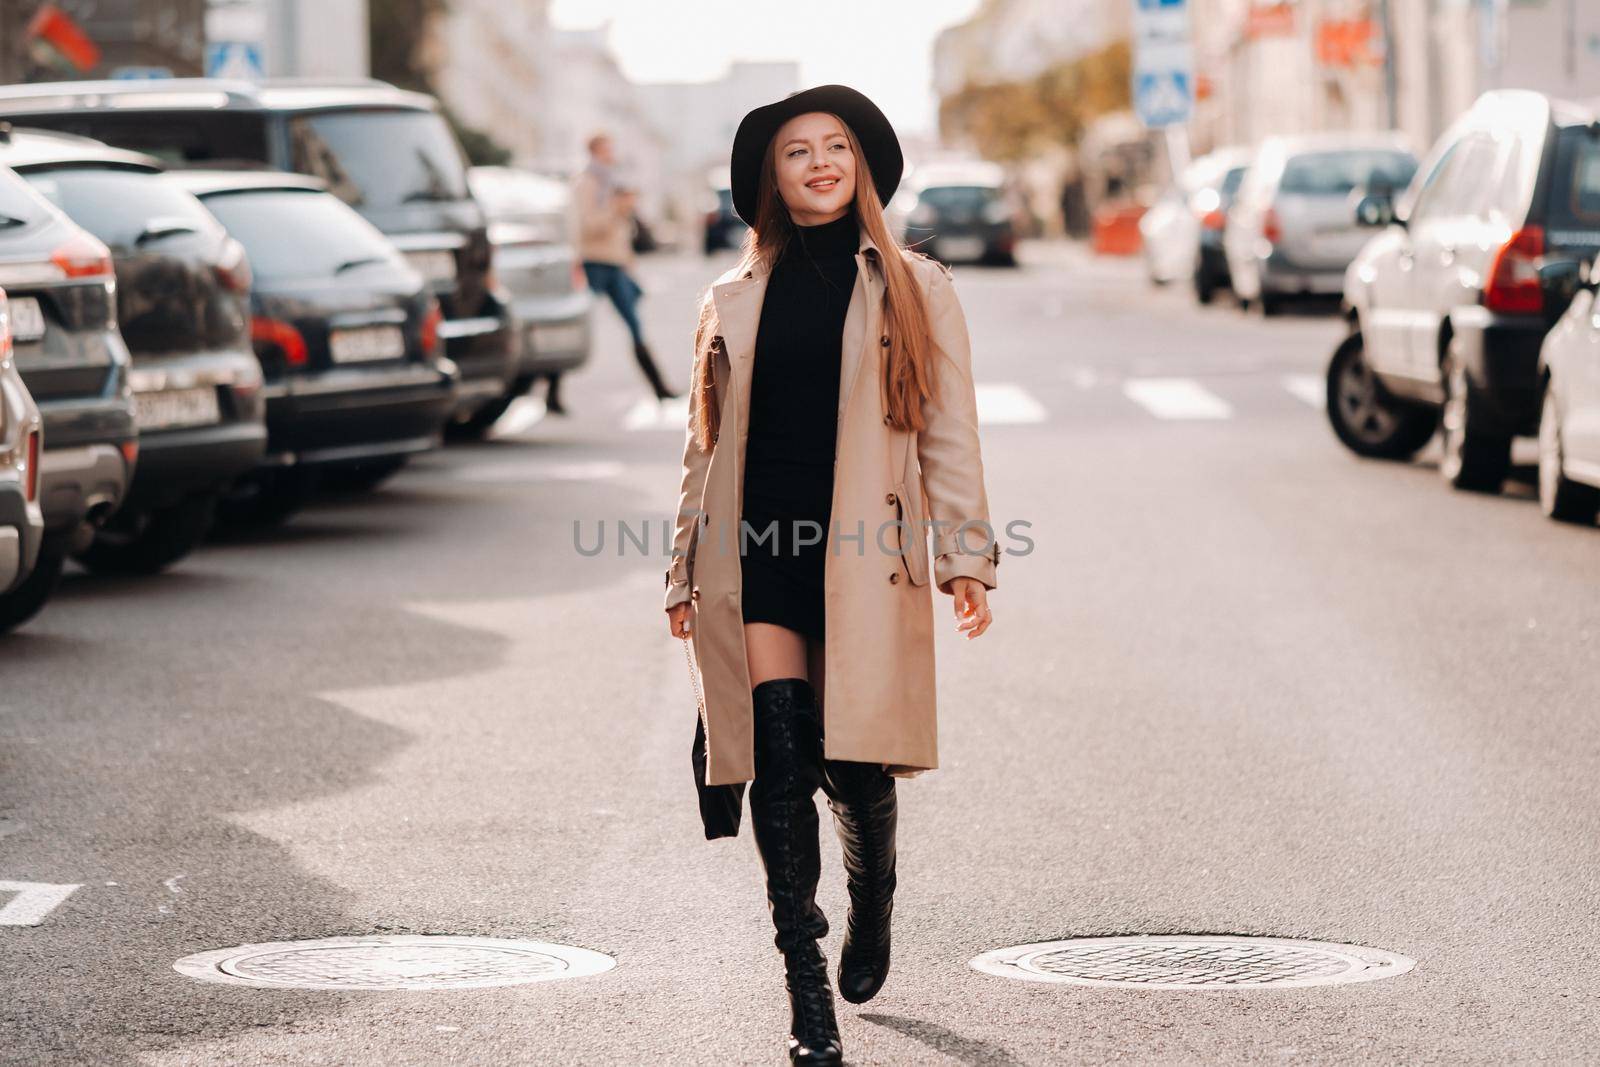 Stylish young woman in a beige coat in a black hat on a city street. Women's street fashion. Autumn clothing.Urban style by Lobachad